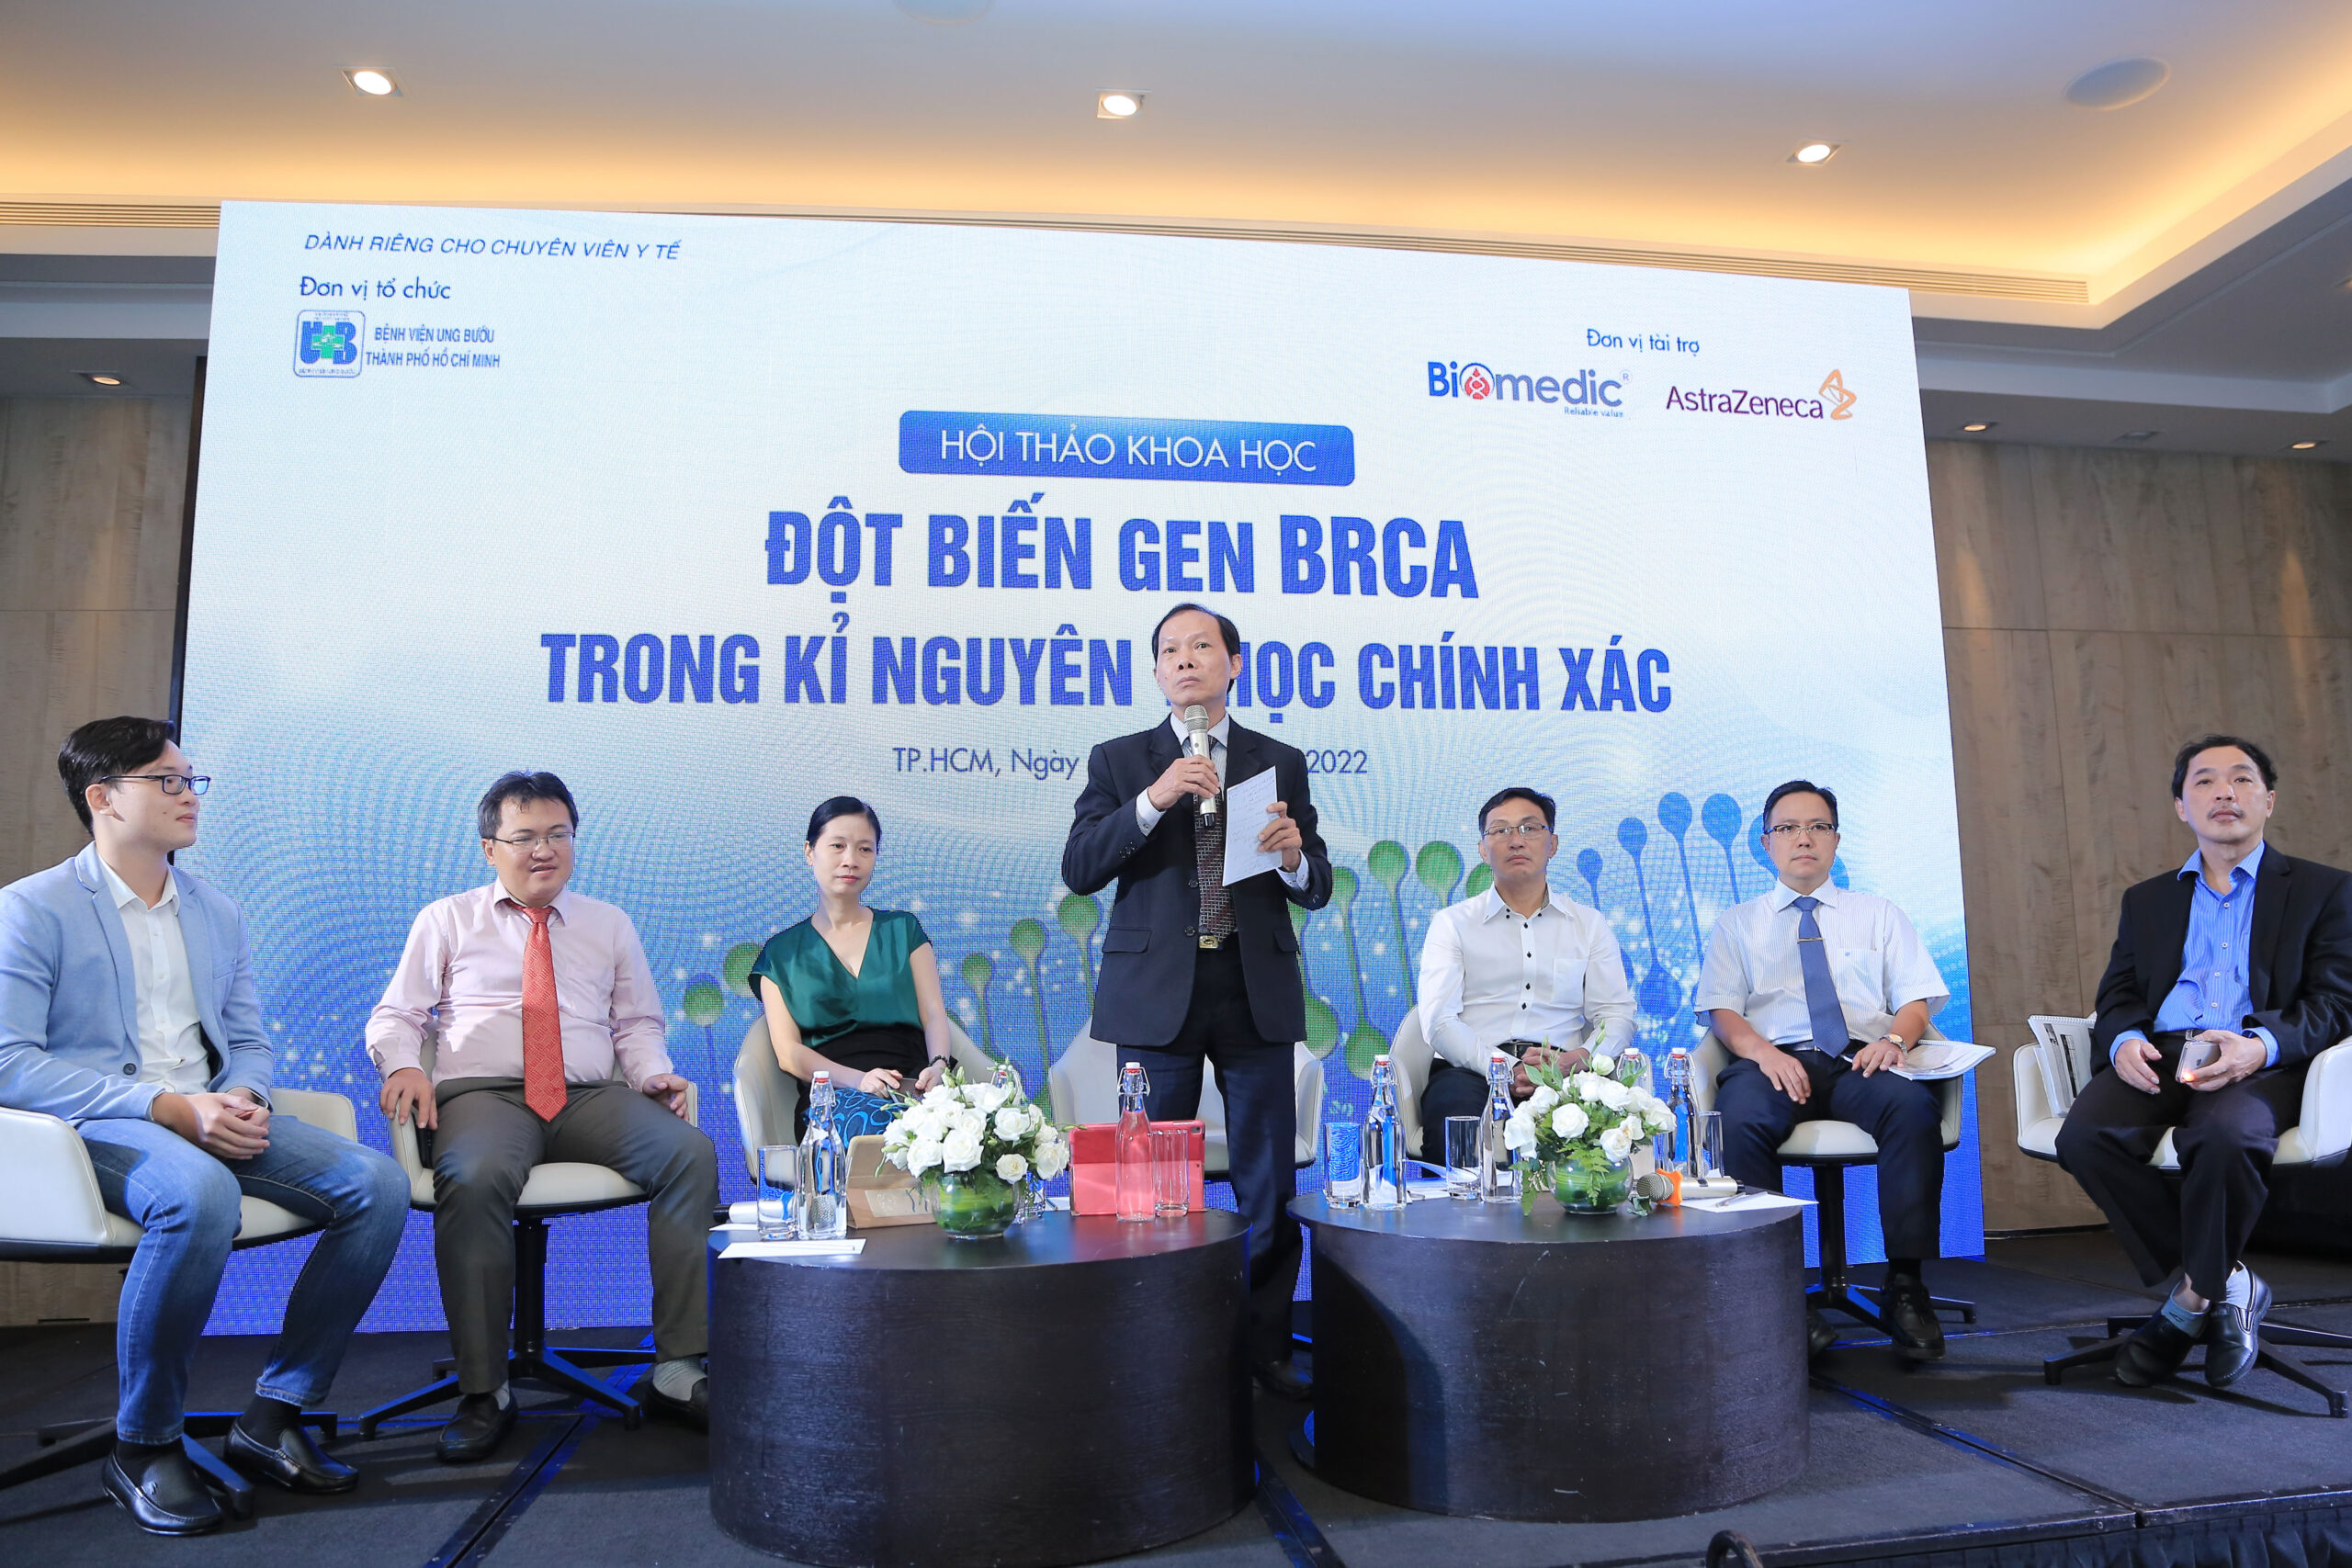 Biomedic cooperates whit Ho Chi Minh oncology hospital to organize scientific workshop “BRCA mutations in the era of precision medicine”